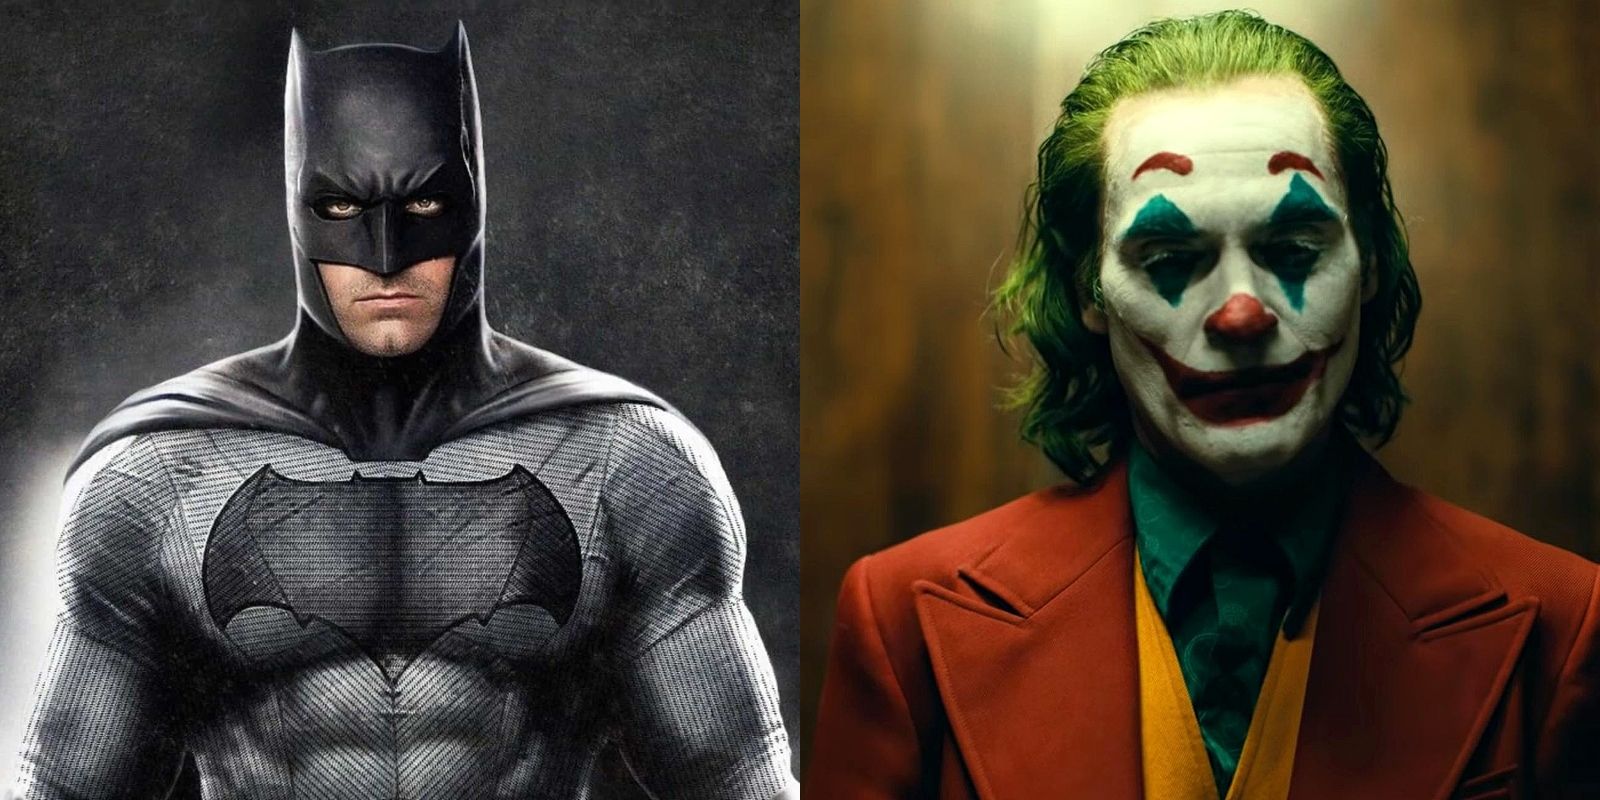 Cosplayers Create The Batfleck/Joker Crossover Fans Have Been Wanting